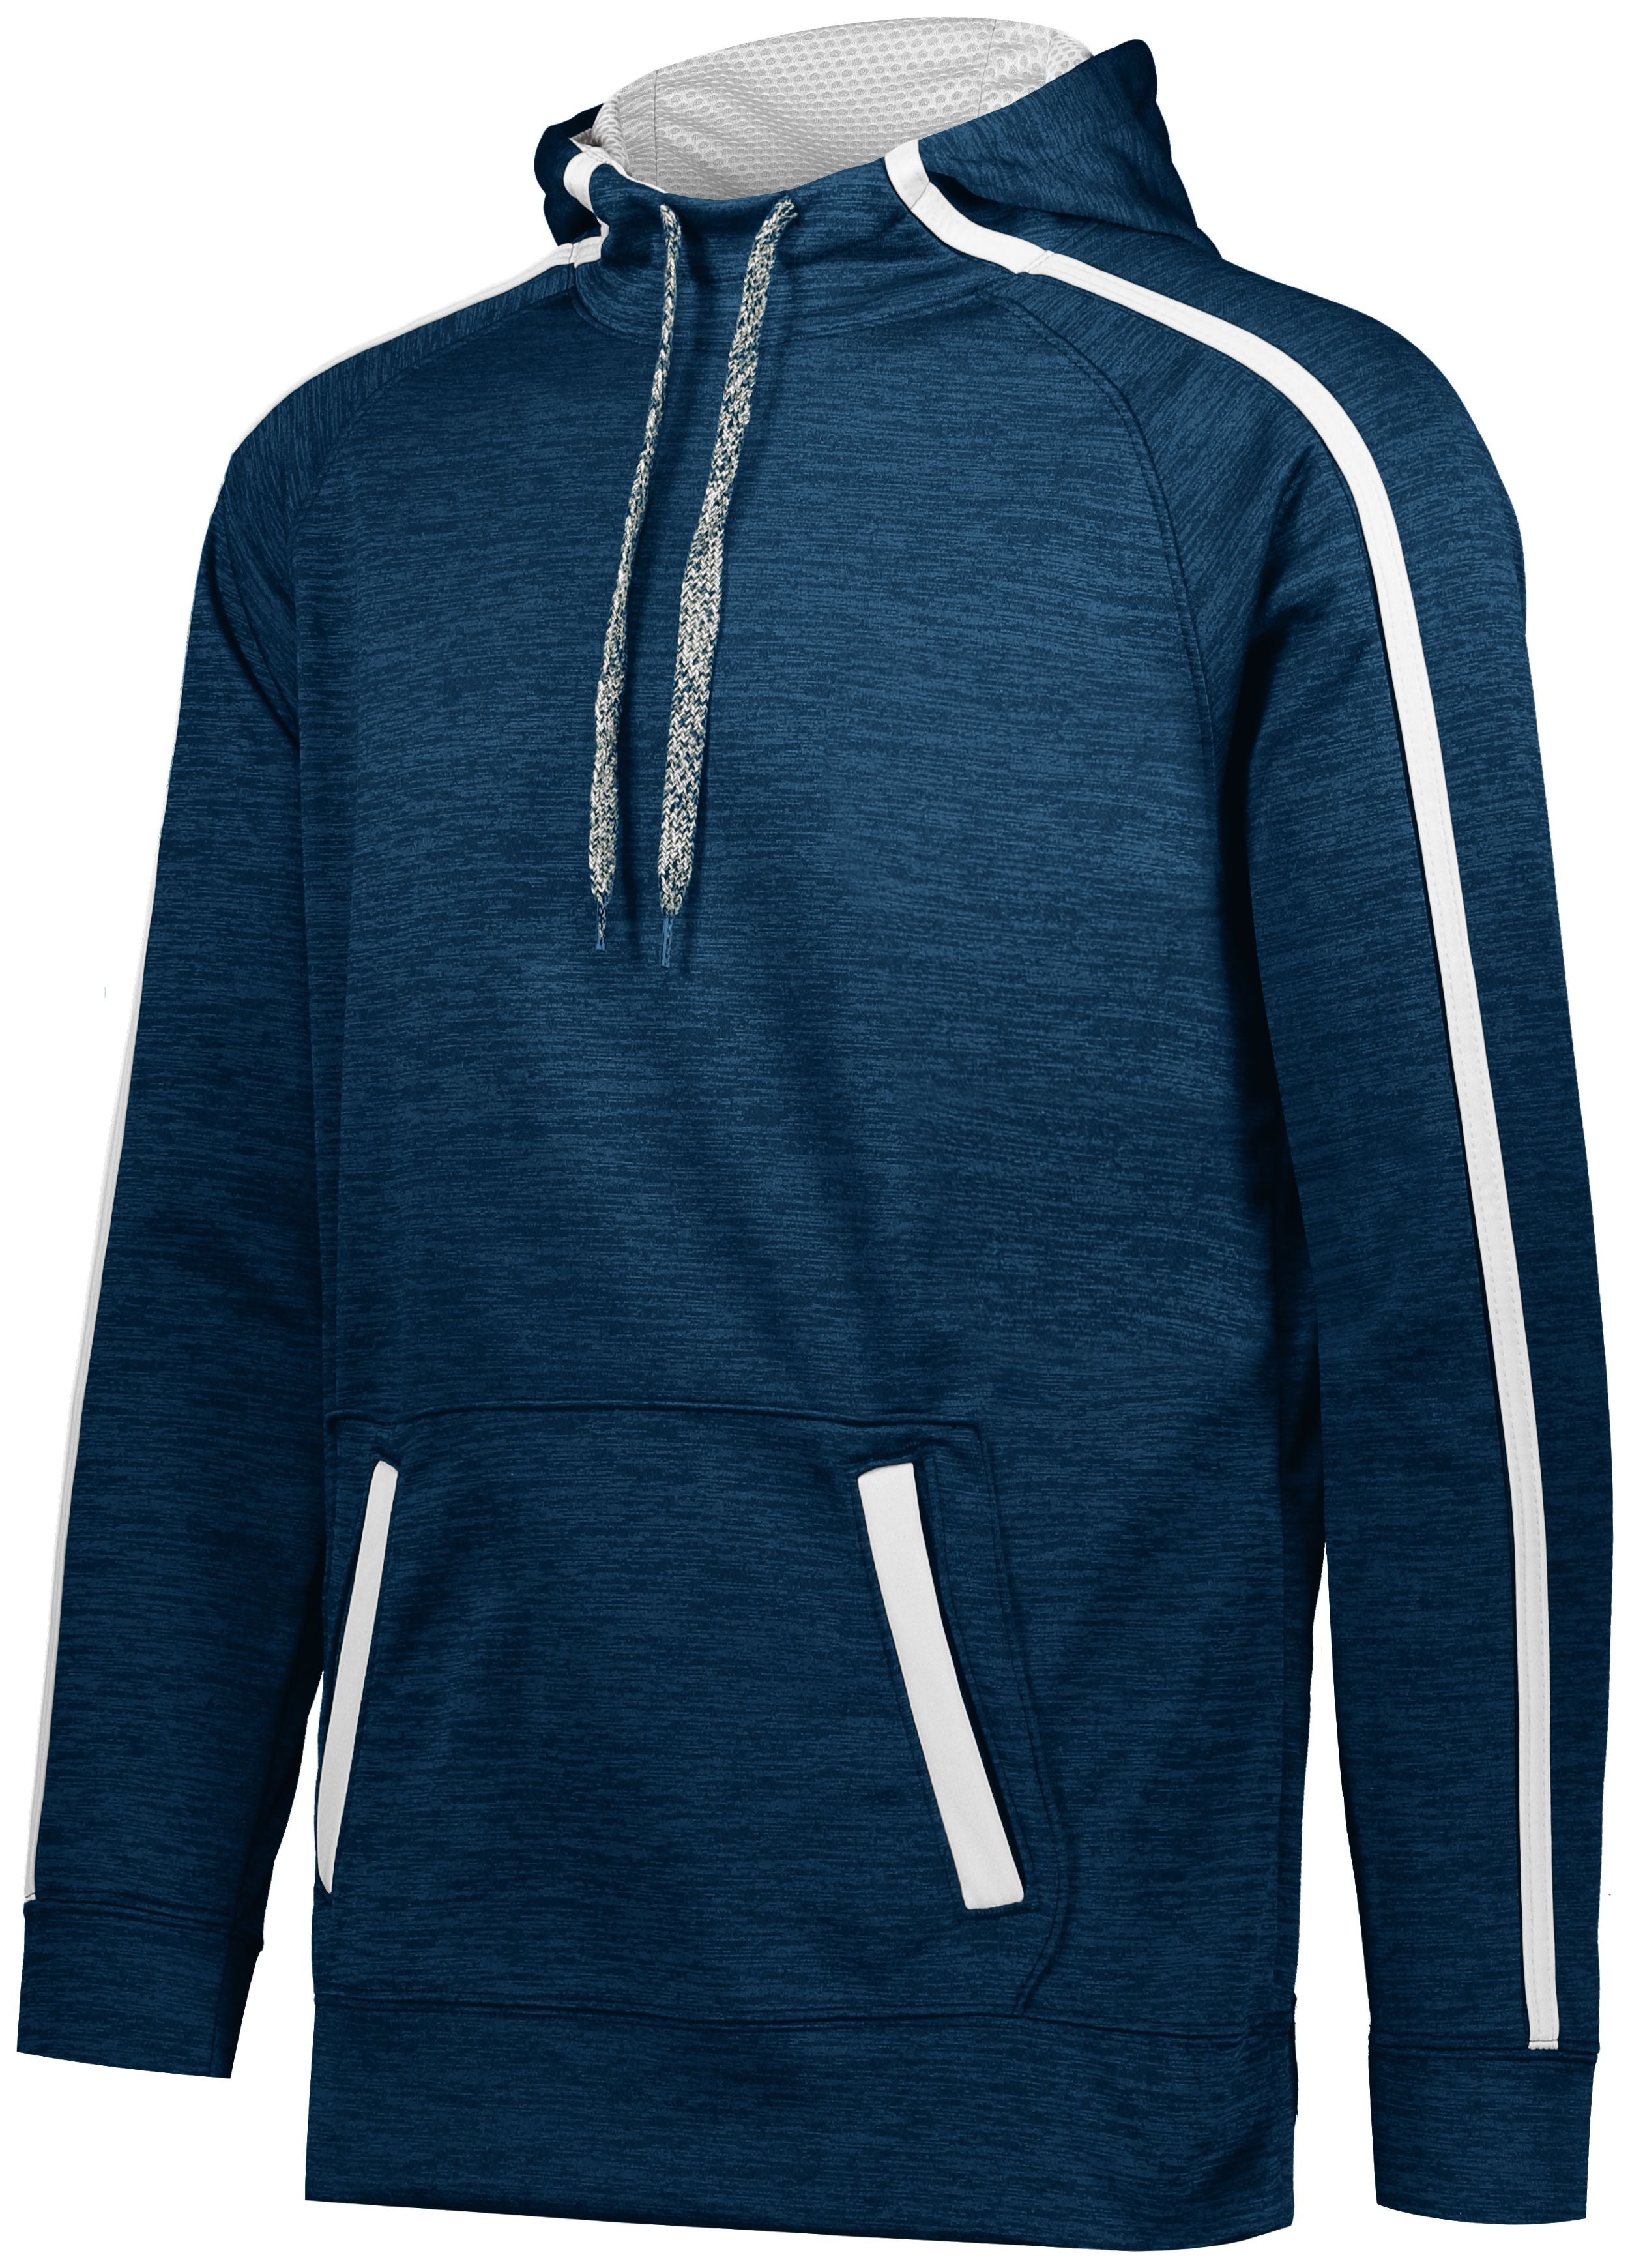 Augusta Sportswear Stoked Tonal Heather Hoodie in Navy/White  -Part of the Adult, Augusta-Products, Shirts, Tonal-Fleece-Collection product lines at KanaleyCreations.com